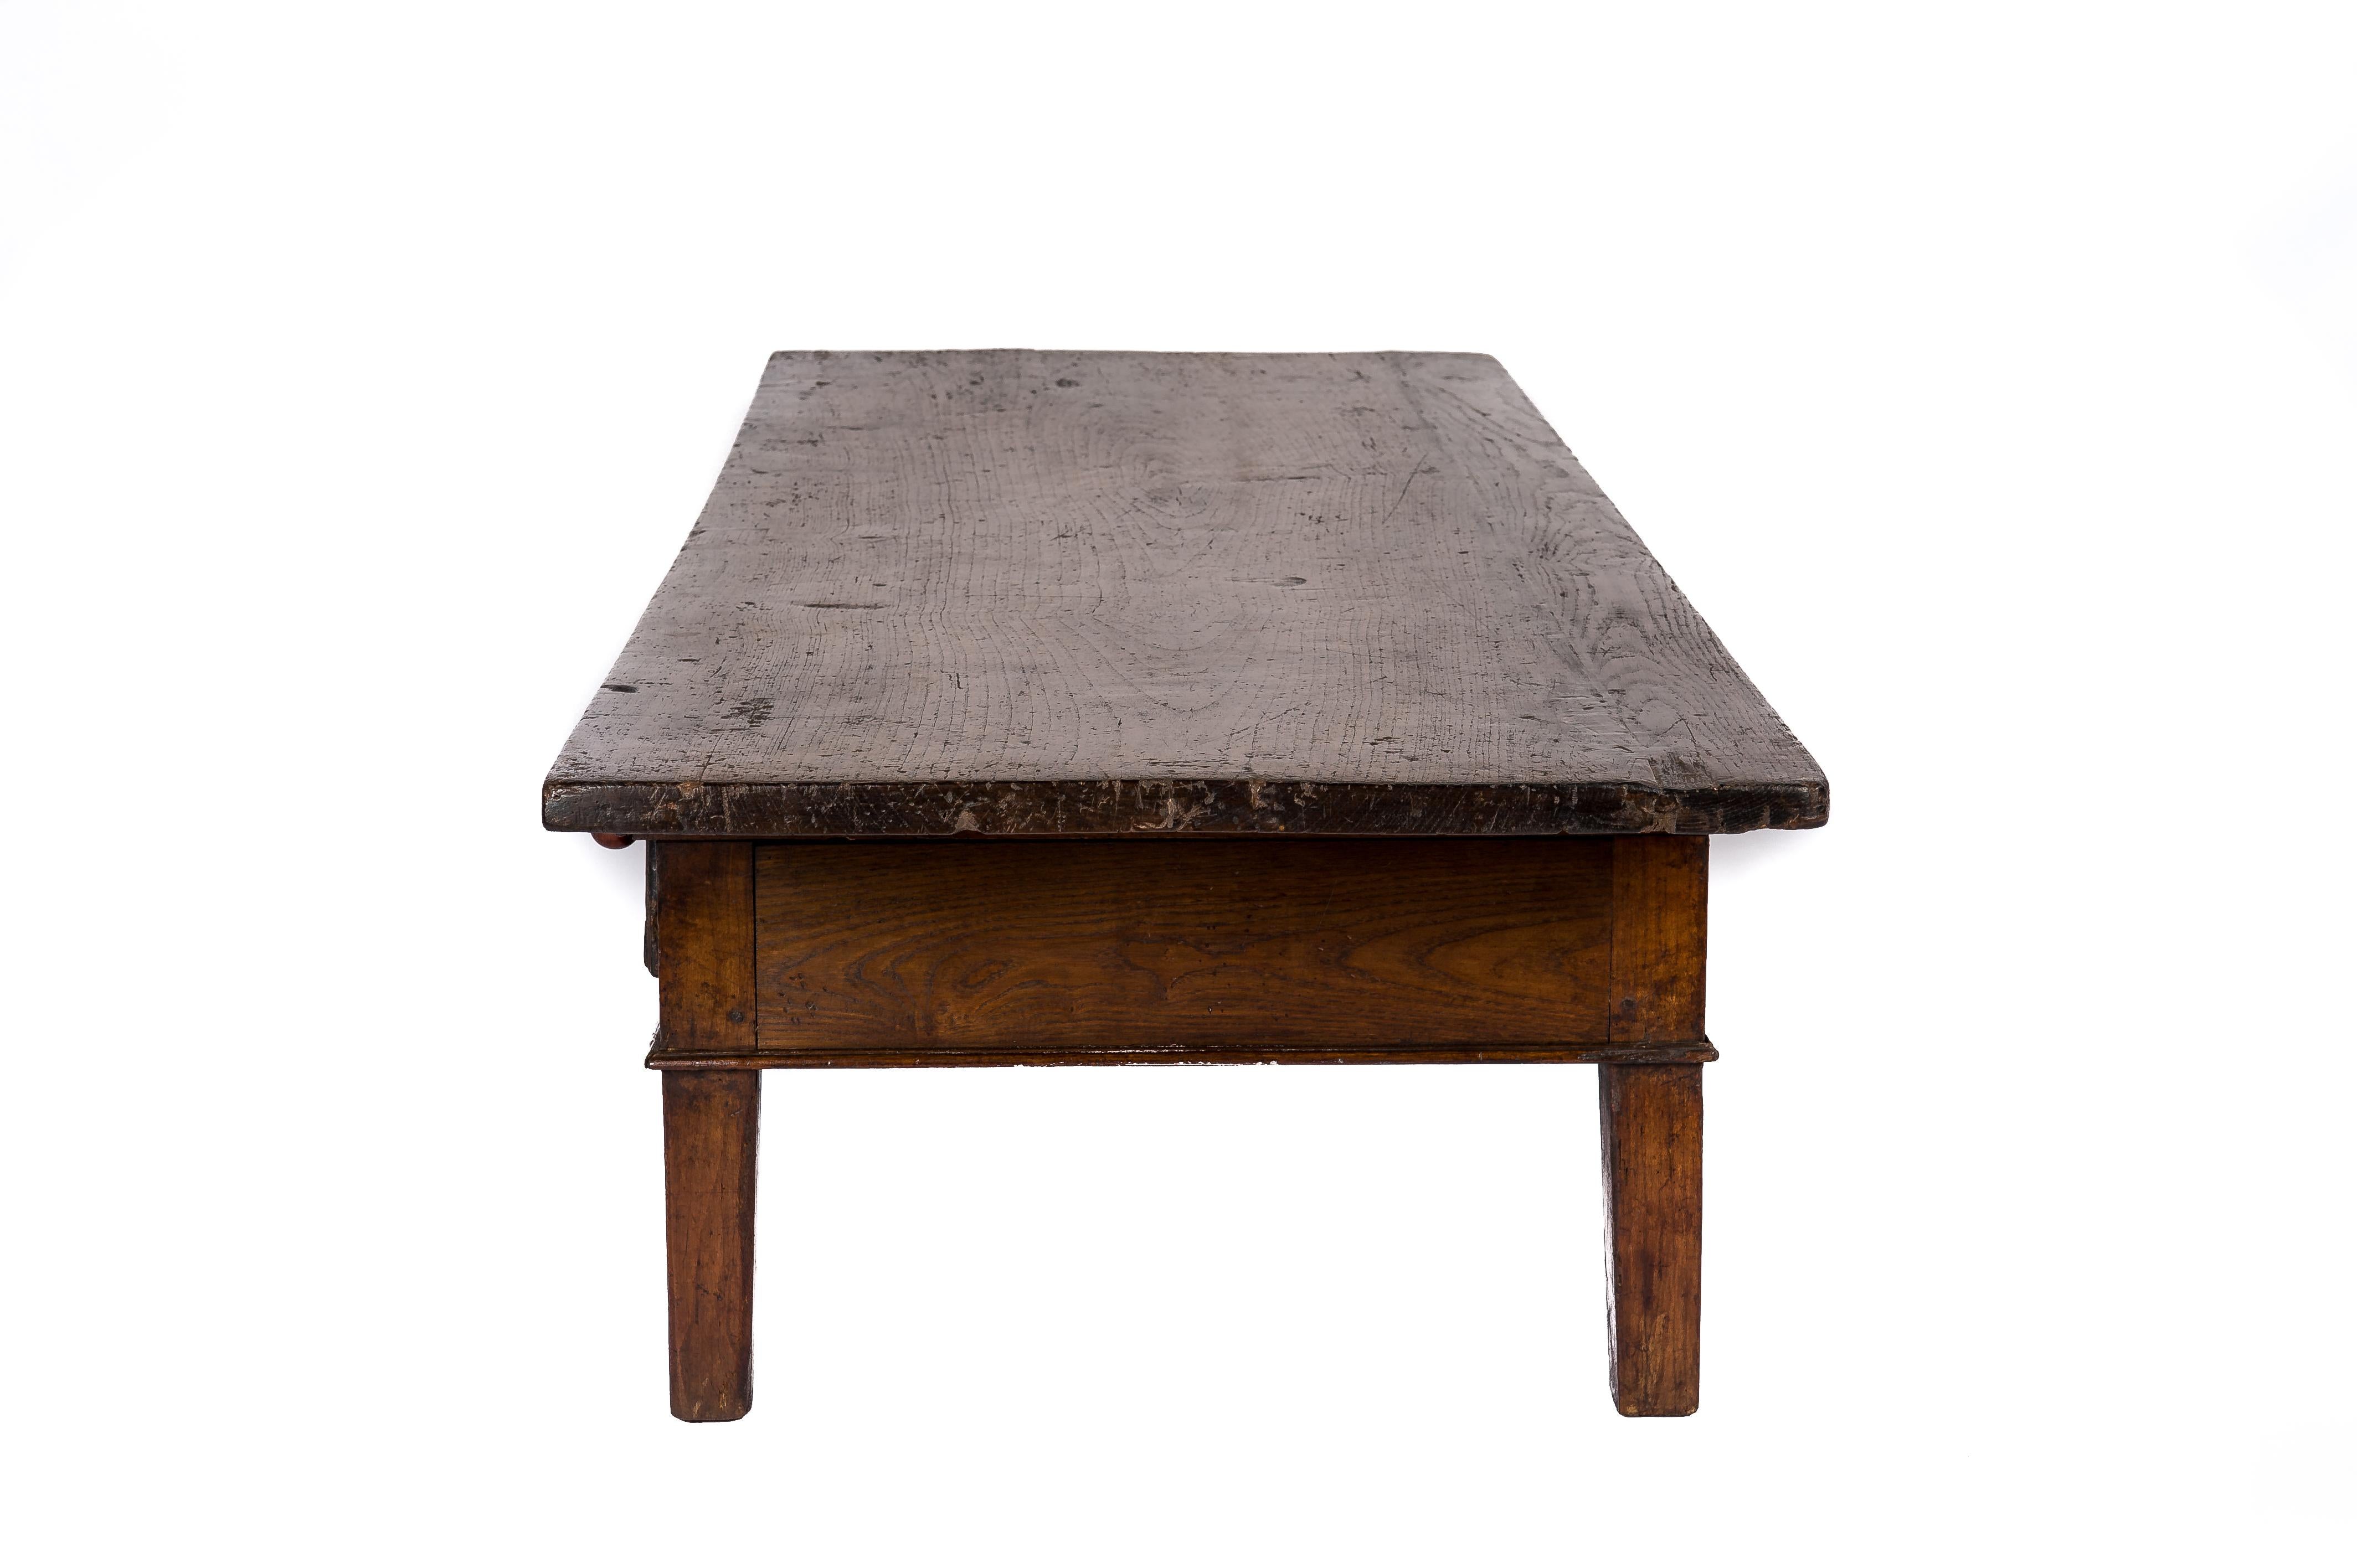 Polished Antique Late 18th-Century Rustic Spanish Warm Brown Chestnut Coffee Table